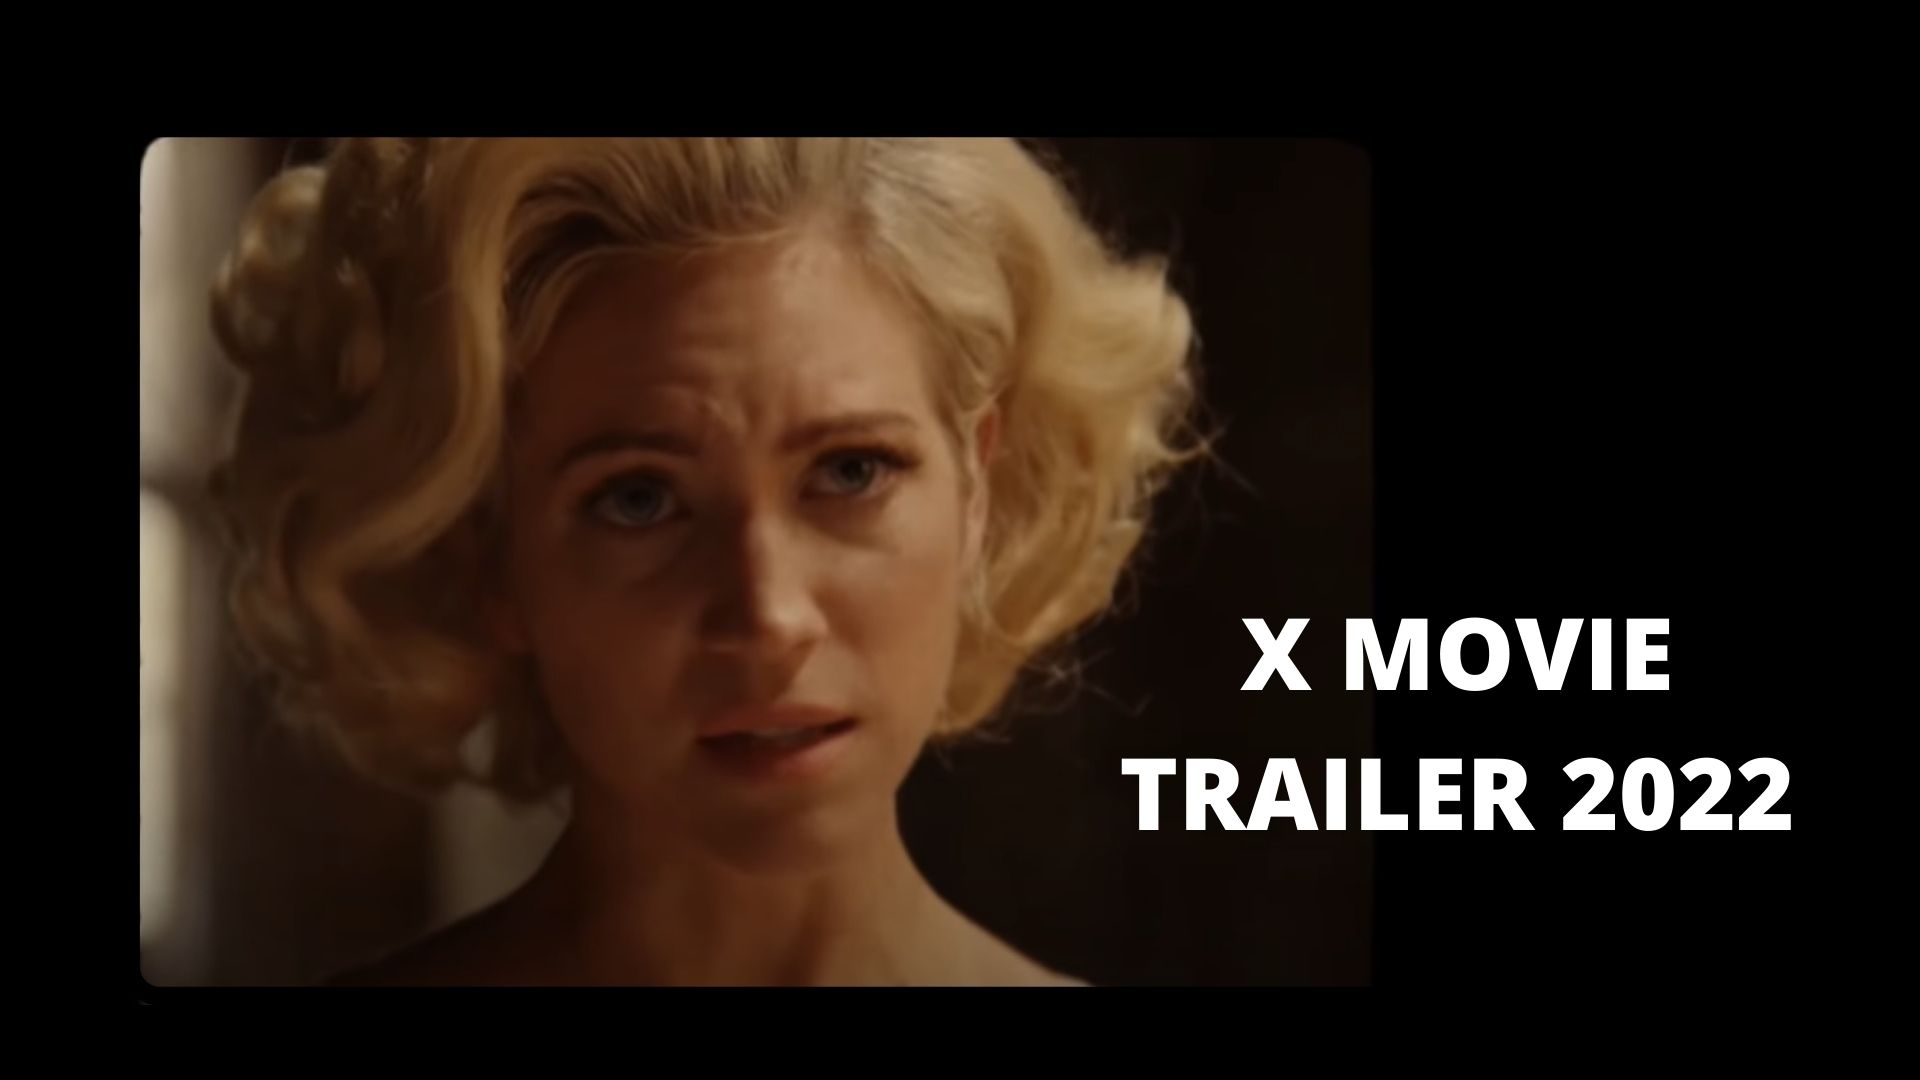 X Movie Trailer 2022 | What is the X movie about?